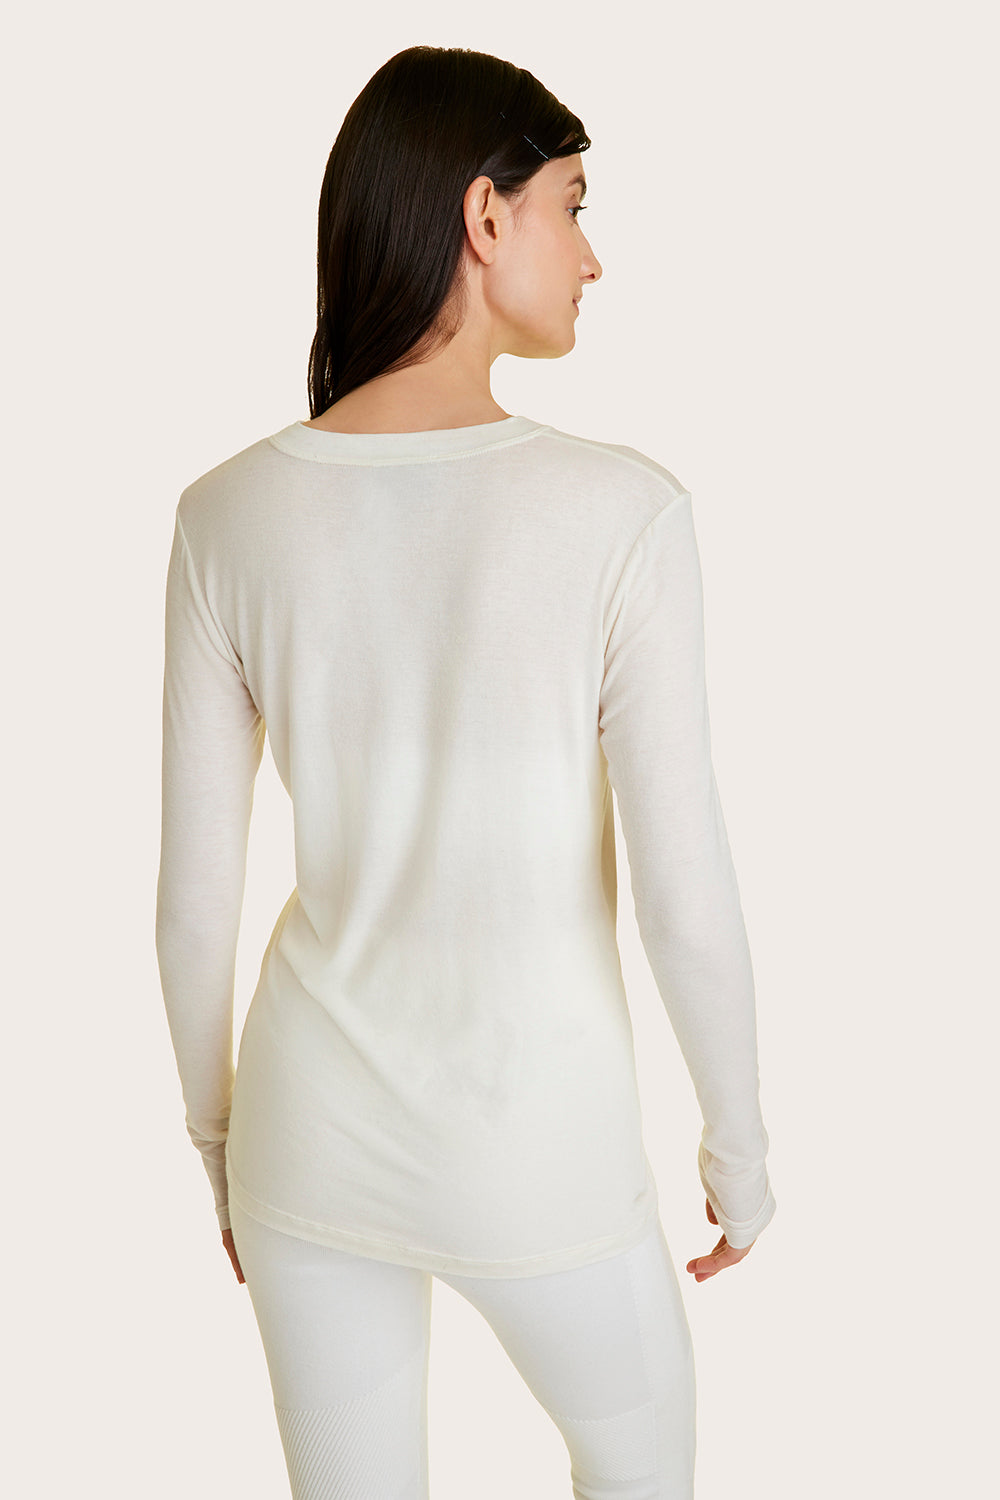 Alala women's cashmere crewneck long sleeve top in white